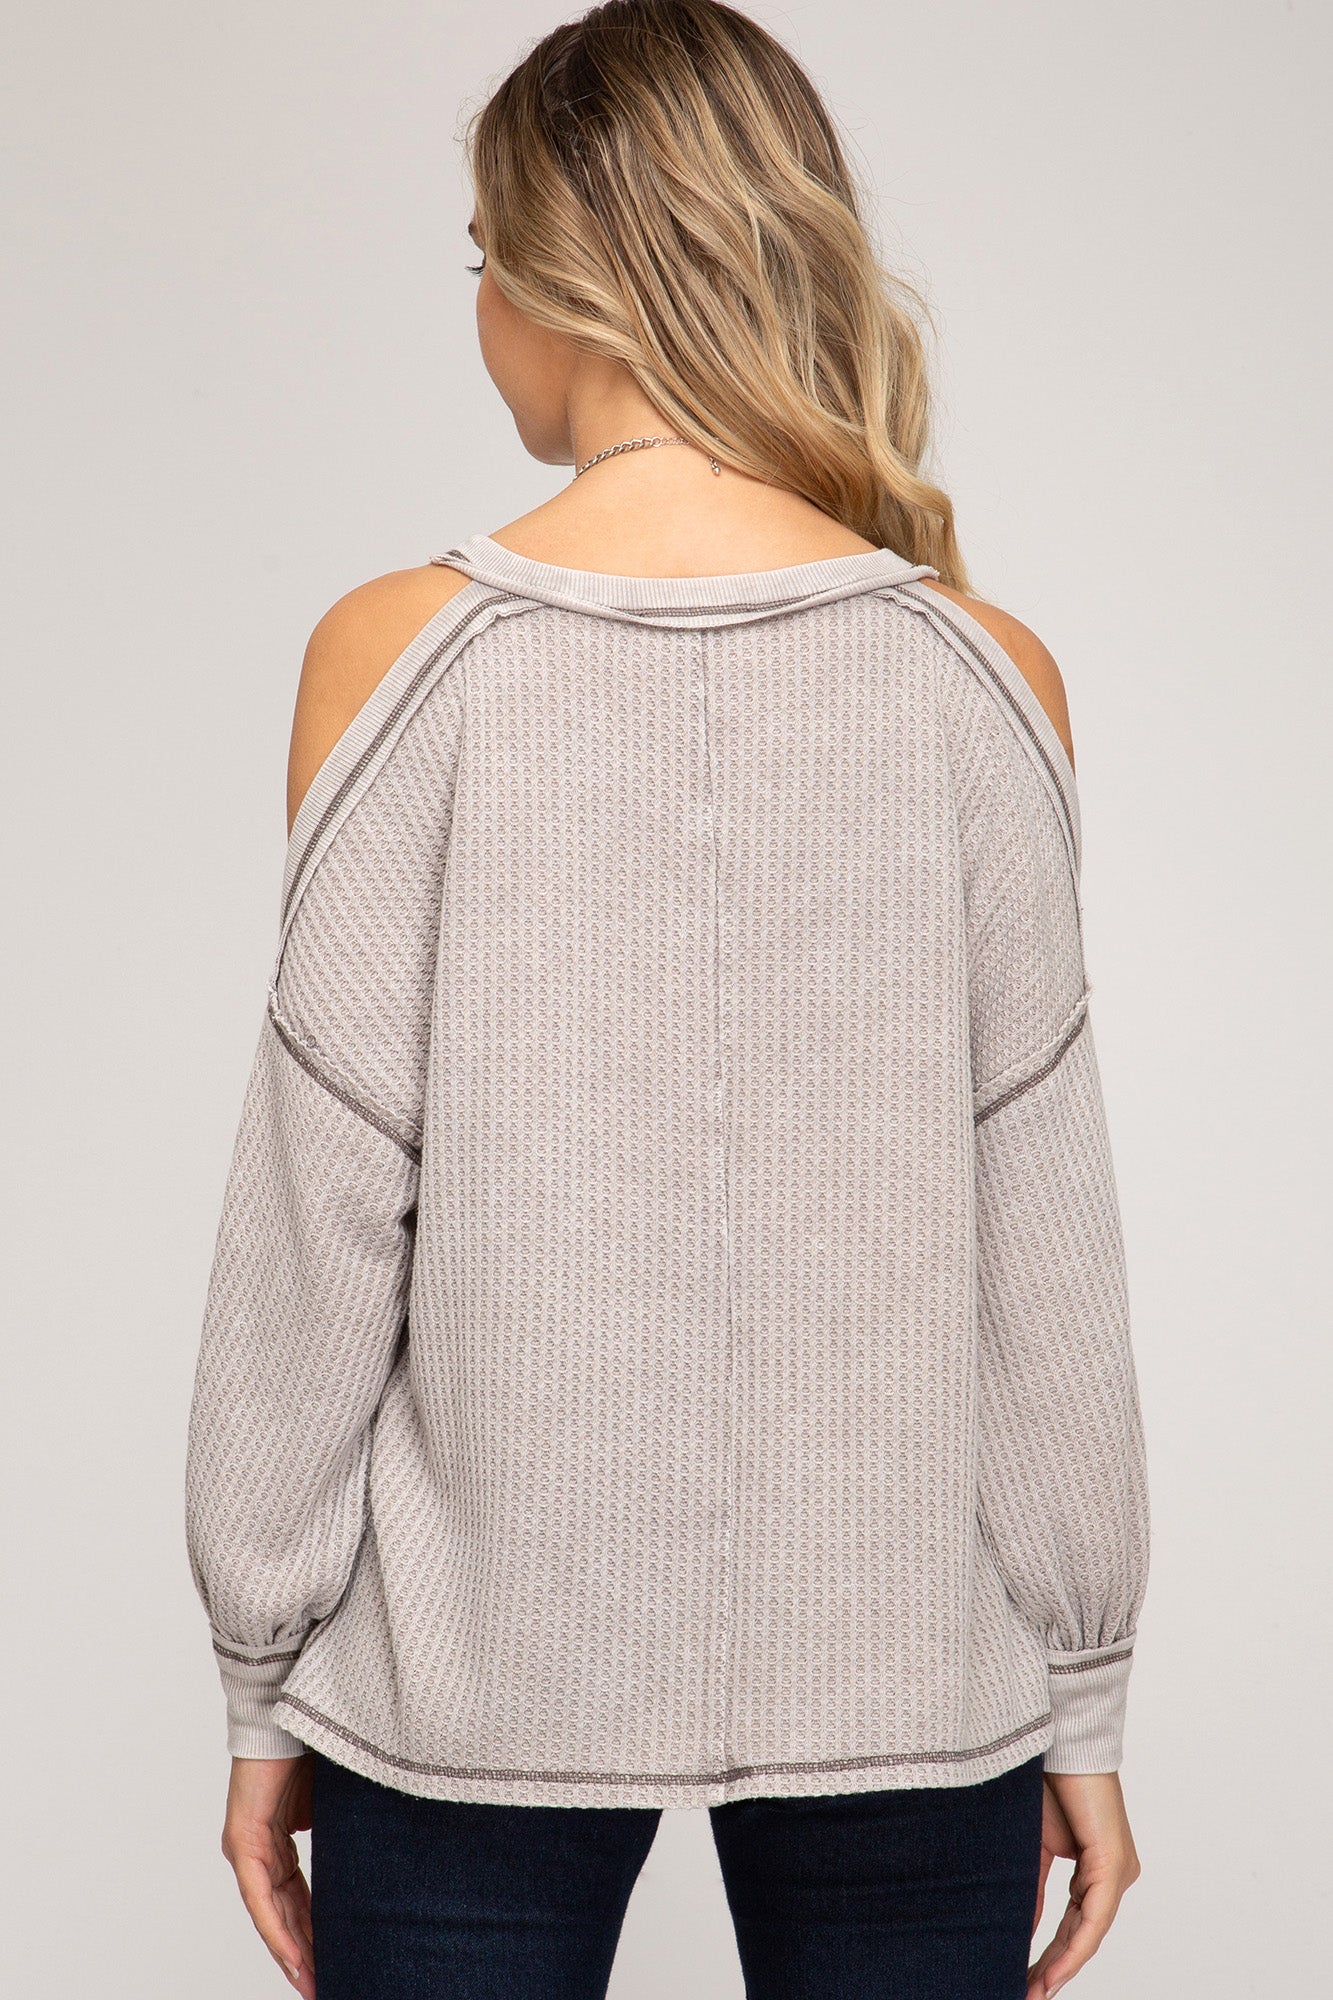 SS Long Sleeve Cold Shoulder Top!